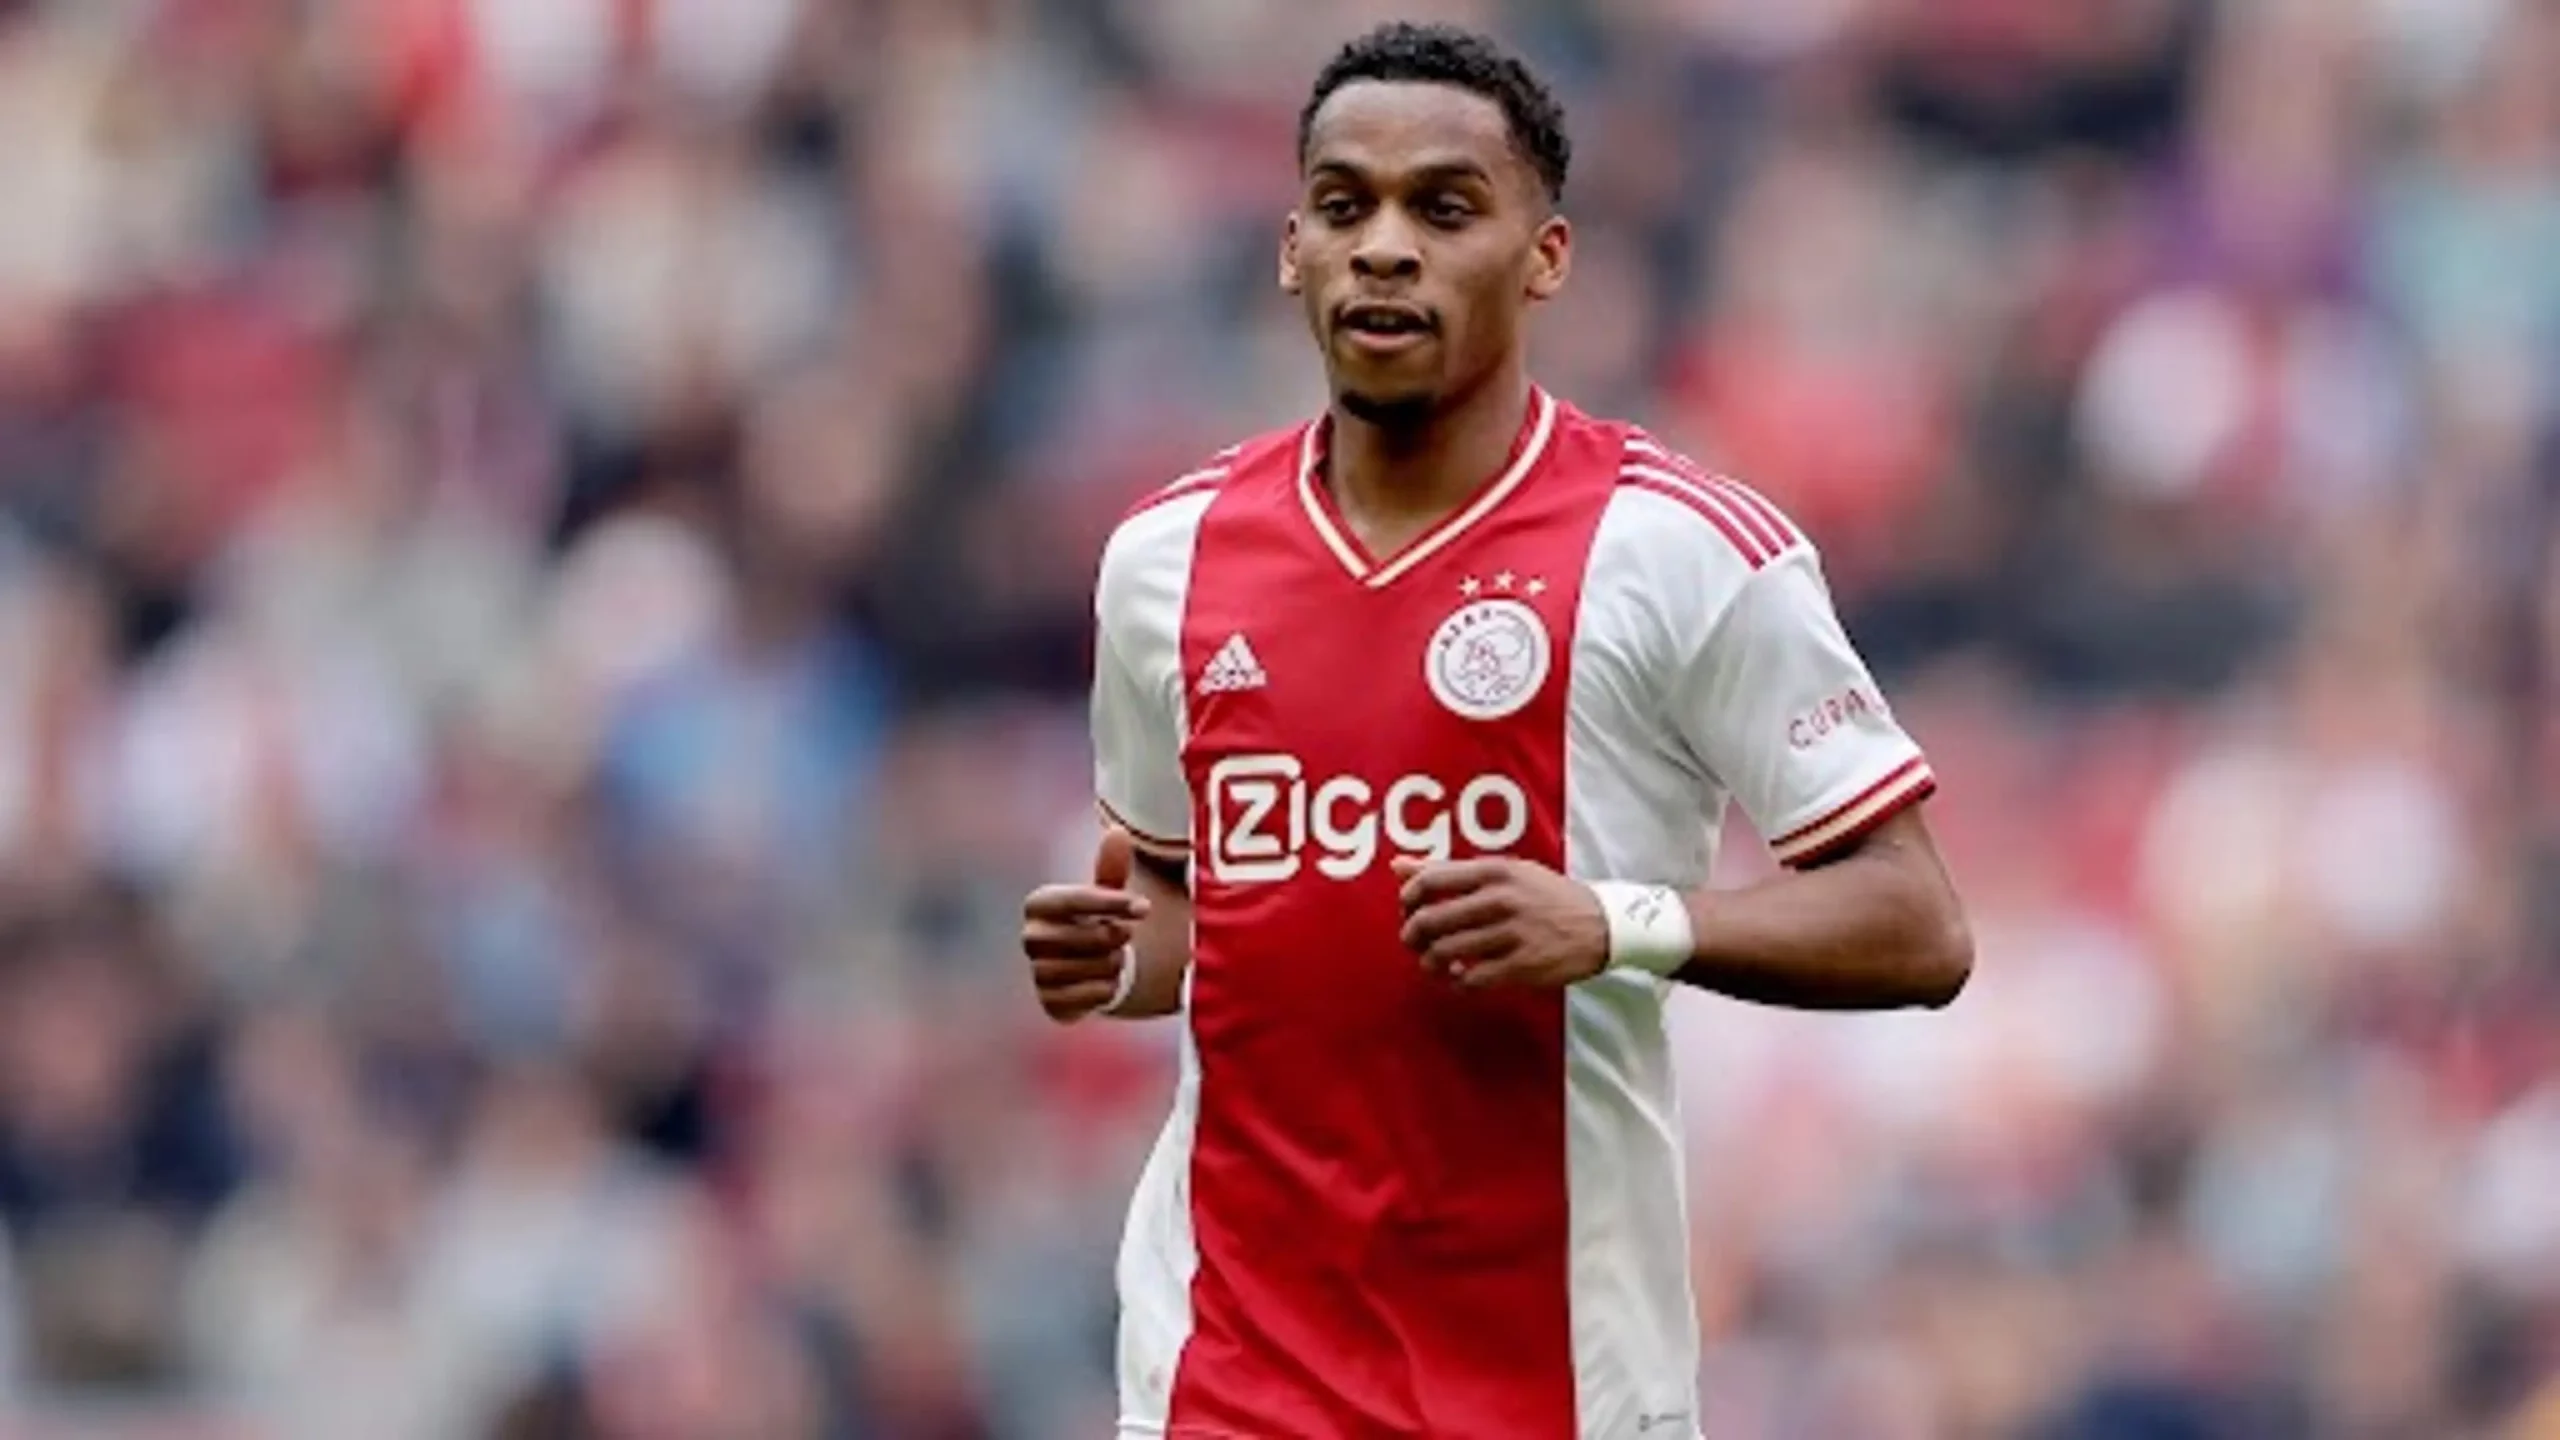 Jurrien Timber made his debut for Ajax in March 2020